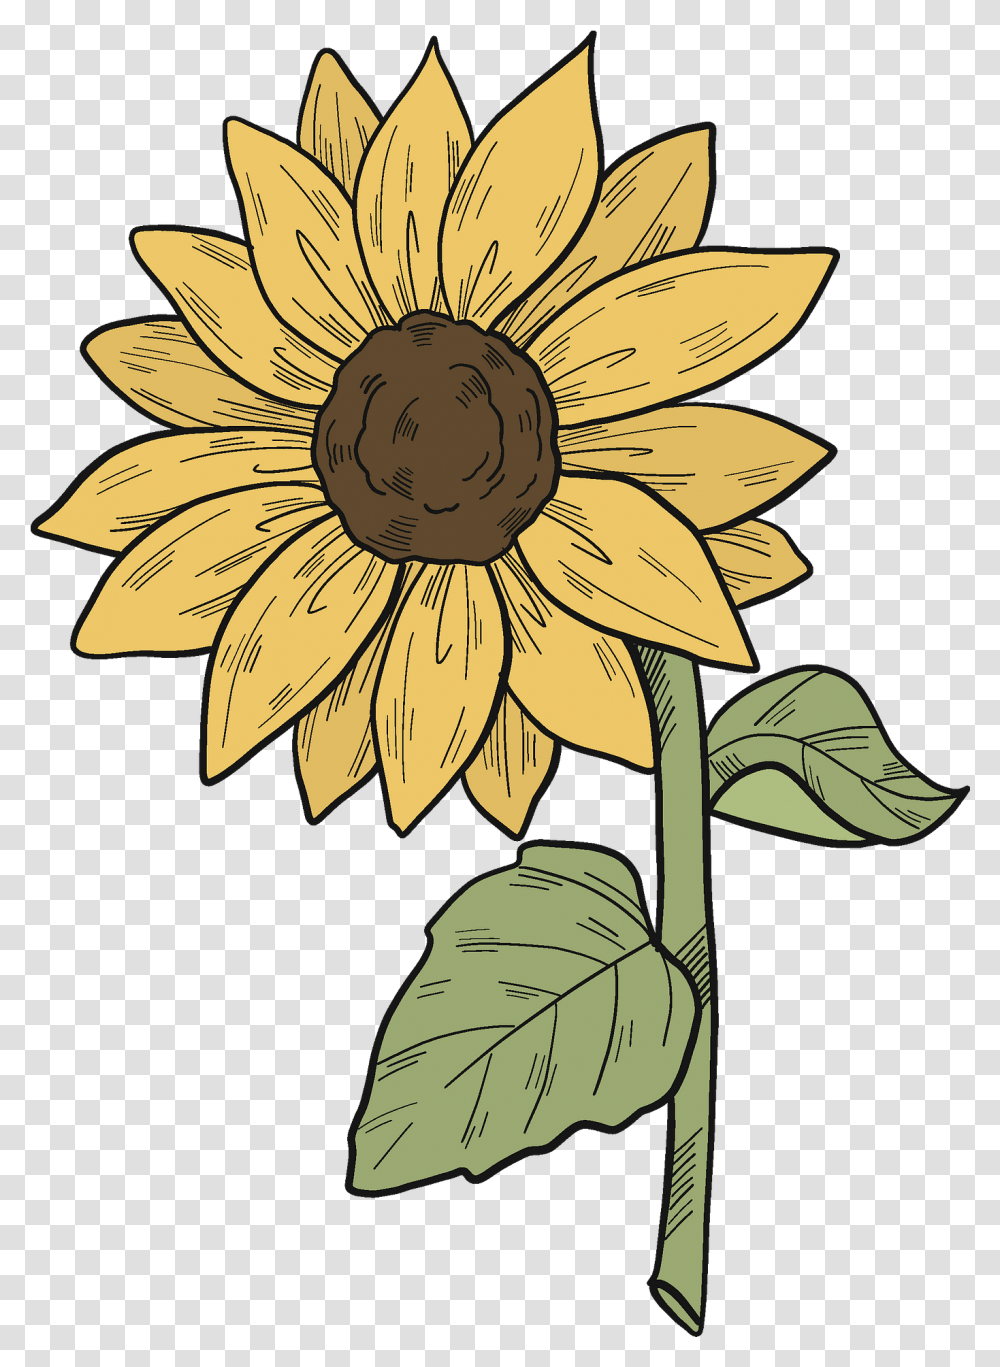 Sunflower Clipart Free Download Creazilla Sunflower 11 Petals Clipart Black And White, Plant, Blossom, Treasure Flower, Daisy Transparent Png